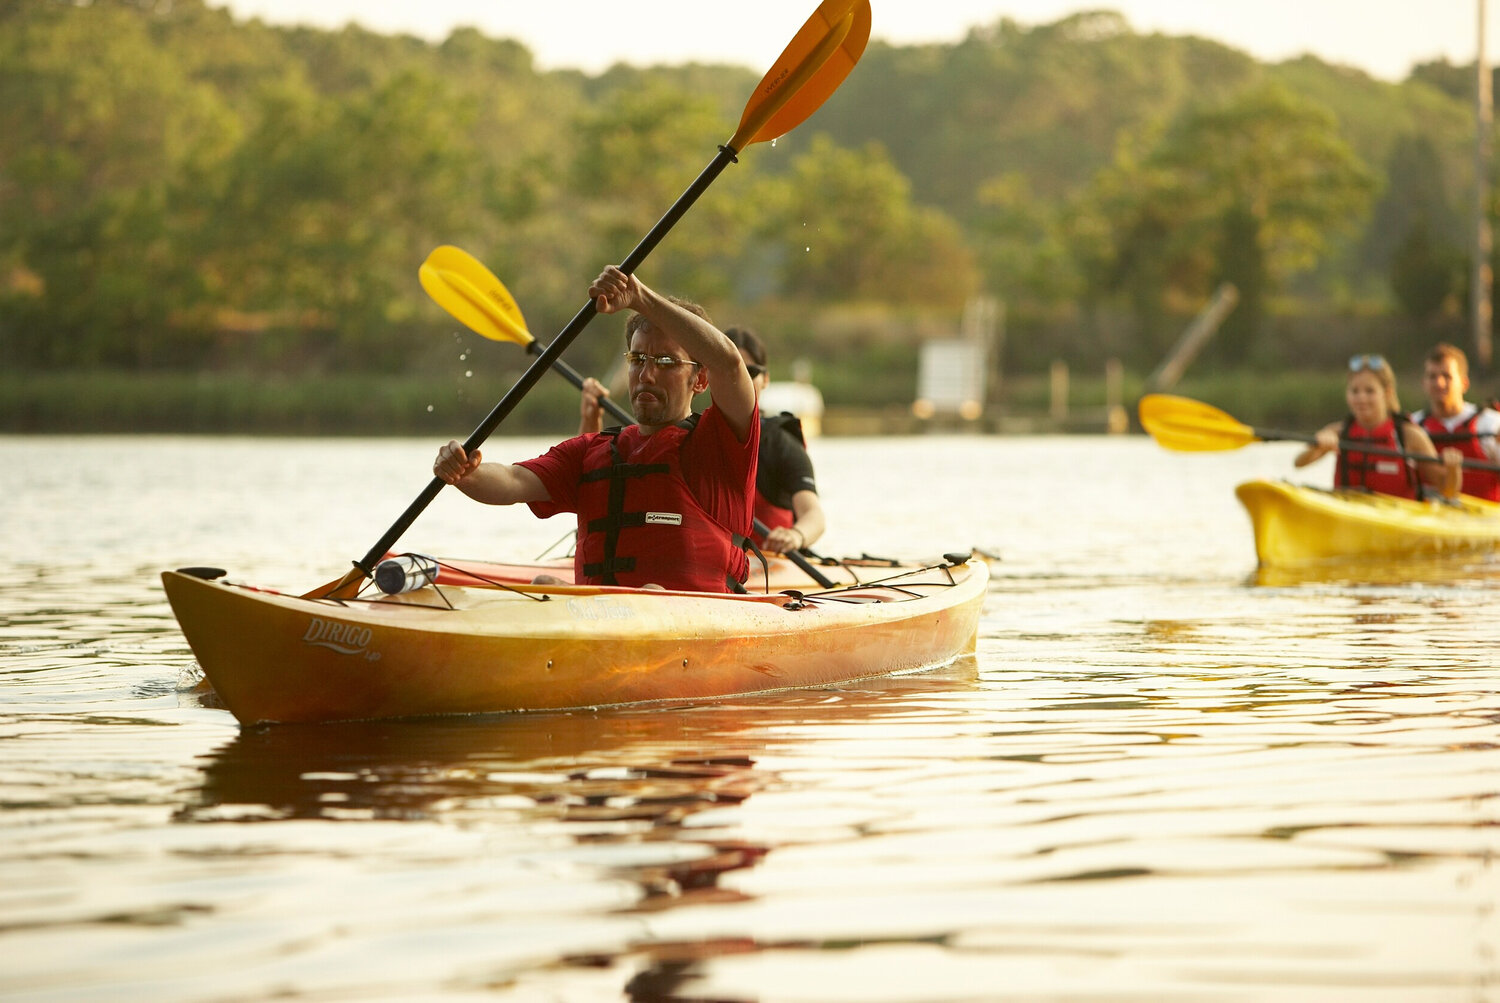 With 1500 
miles of rivers and 
mapped blueways, RI offers adventures for kayakers, paddleboarders, and canoers